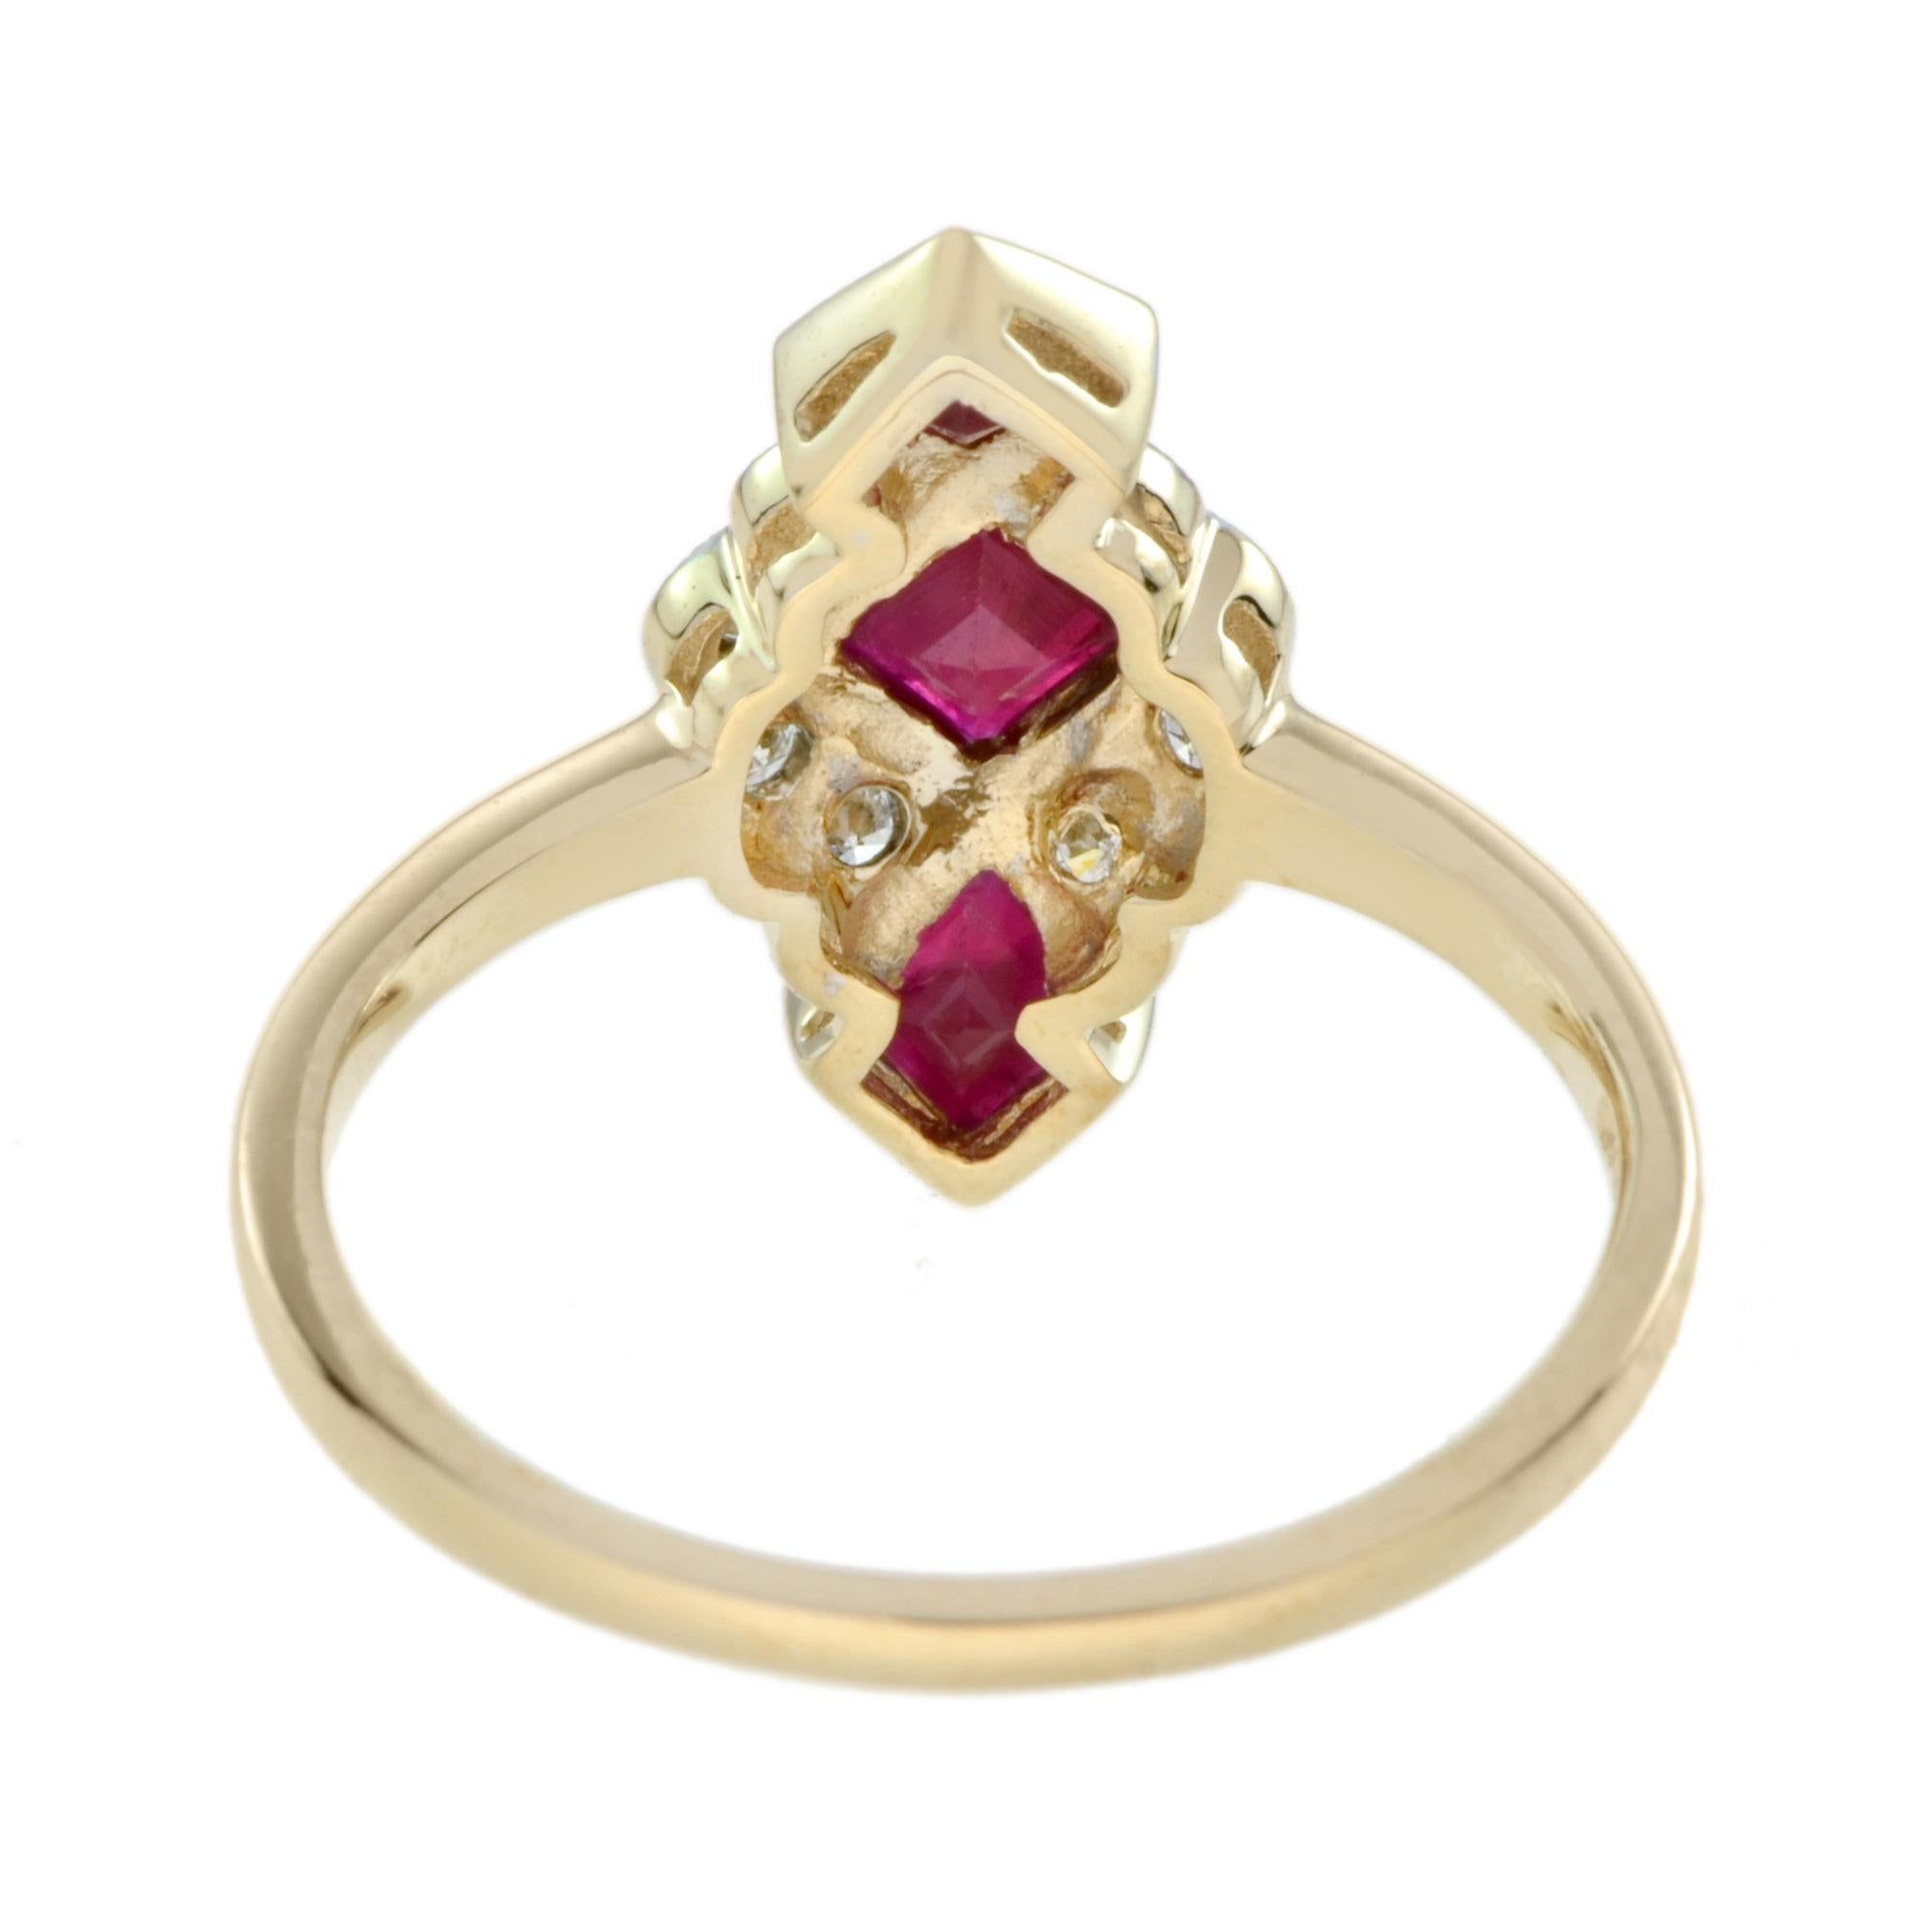 Square Cut Ruby Diamond Vintage Style Vertical Three Stone Ring in 9K Yellow Gold